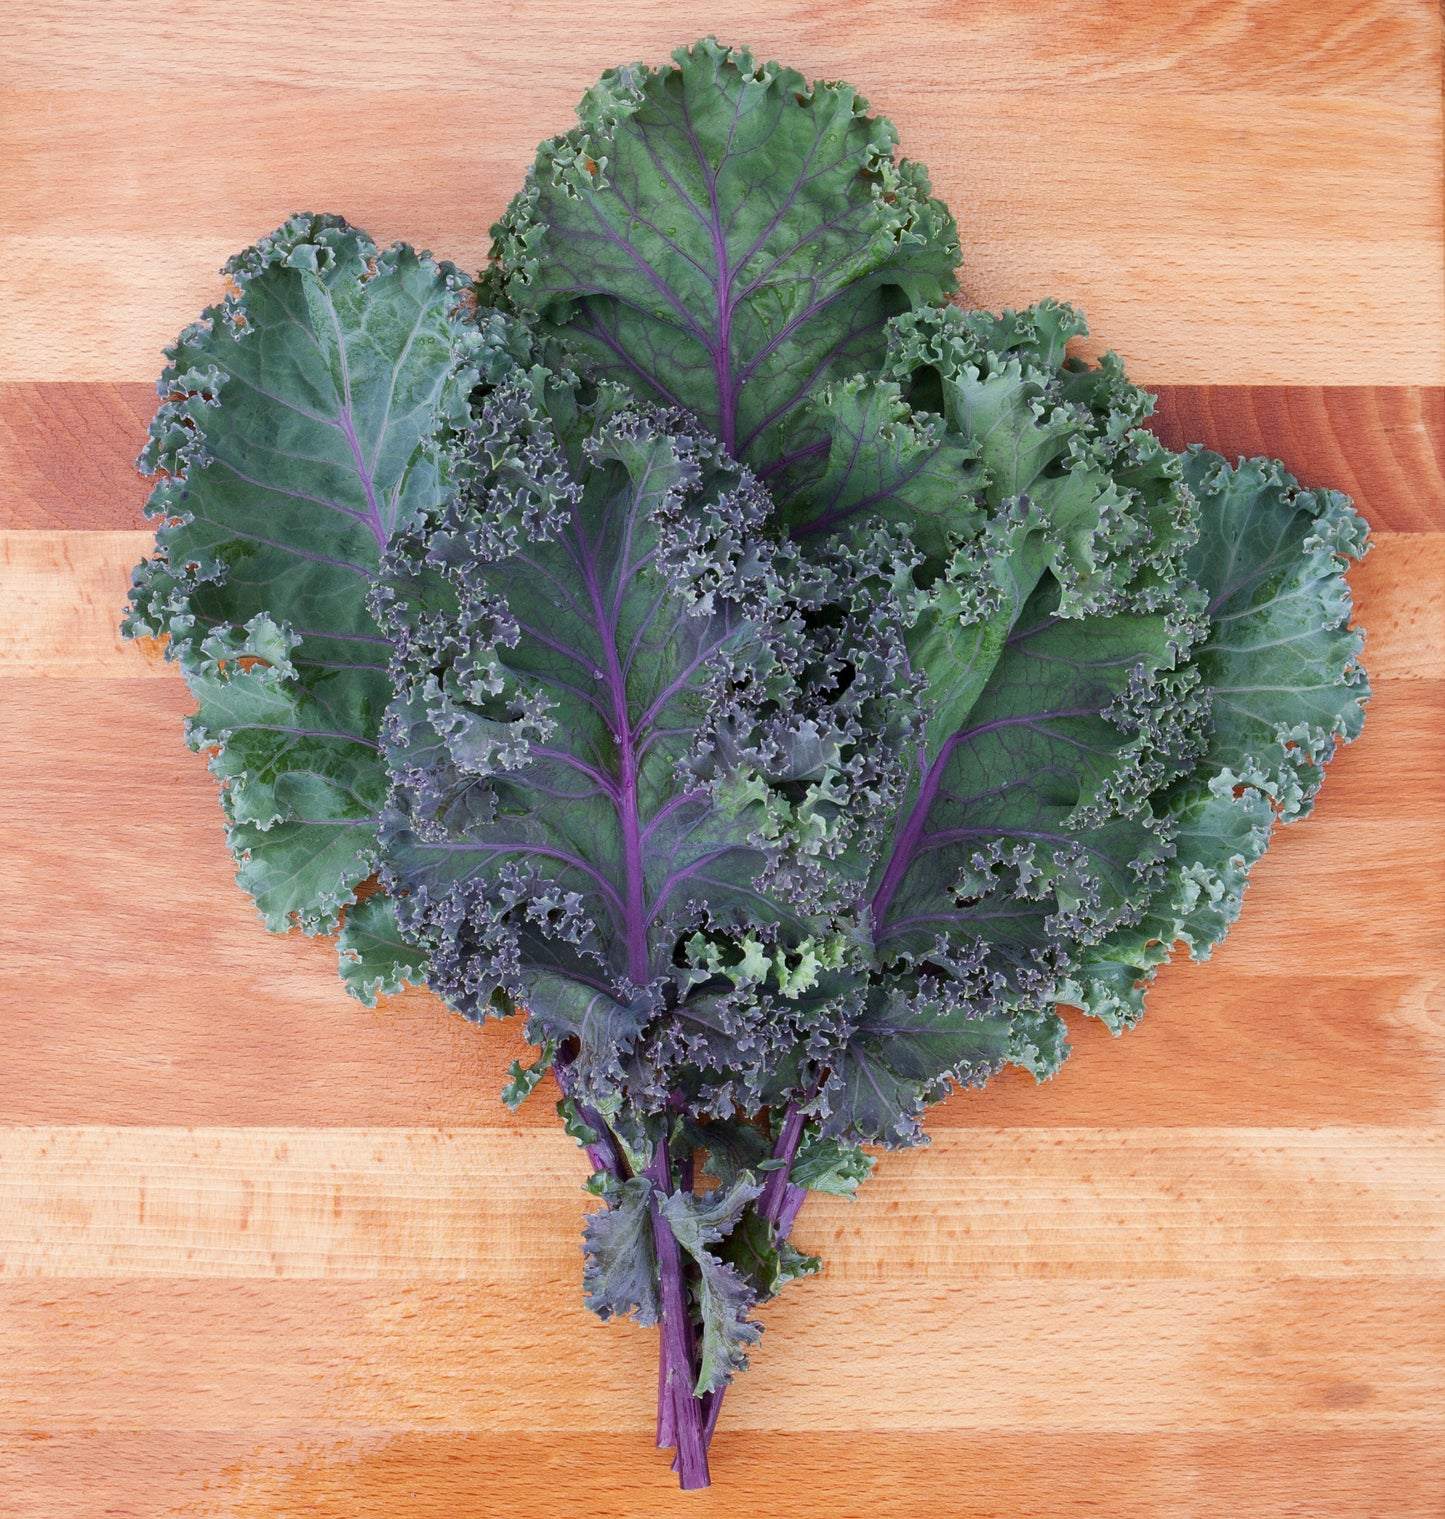 KALE 'Olympic Red'